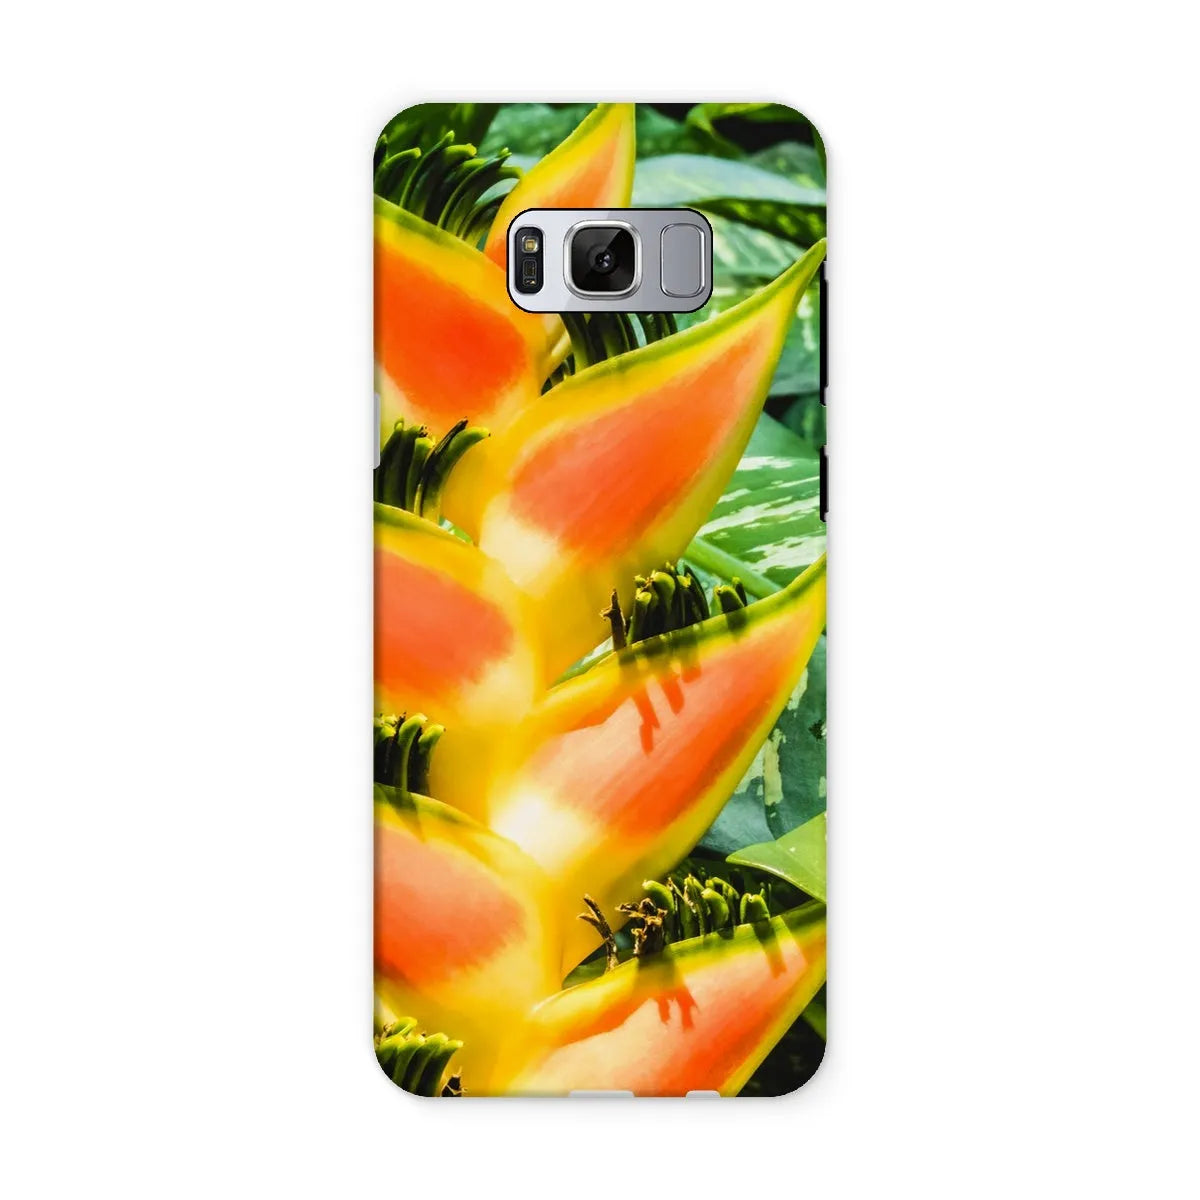 Showstopper Tough Phone Case - Samsung Galaxy S8 / Matte - Mobile Phone Cases - Aesthetic Art